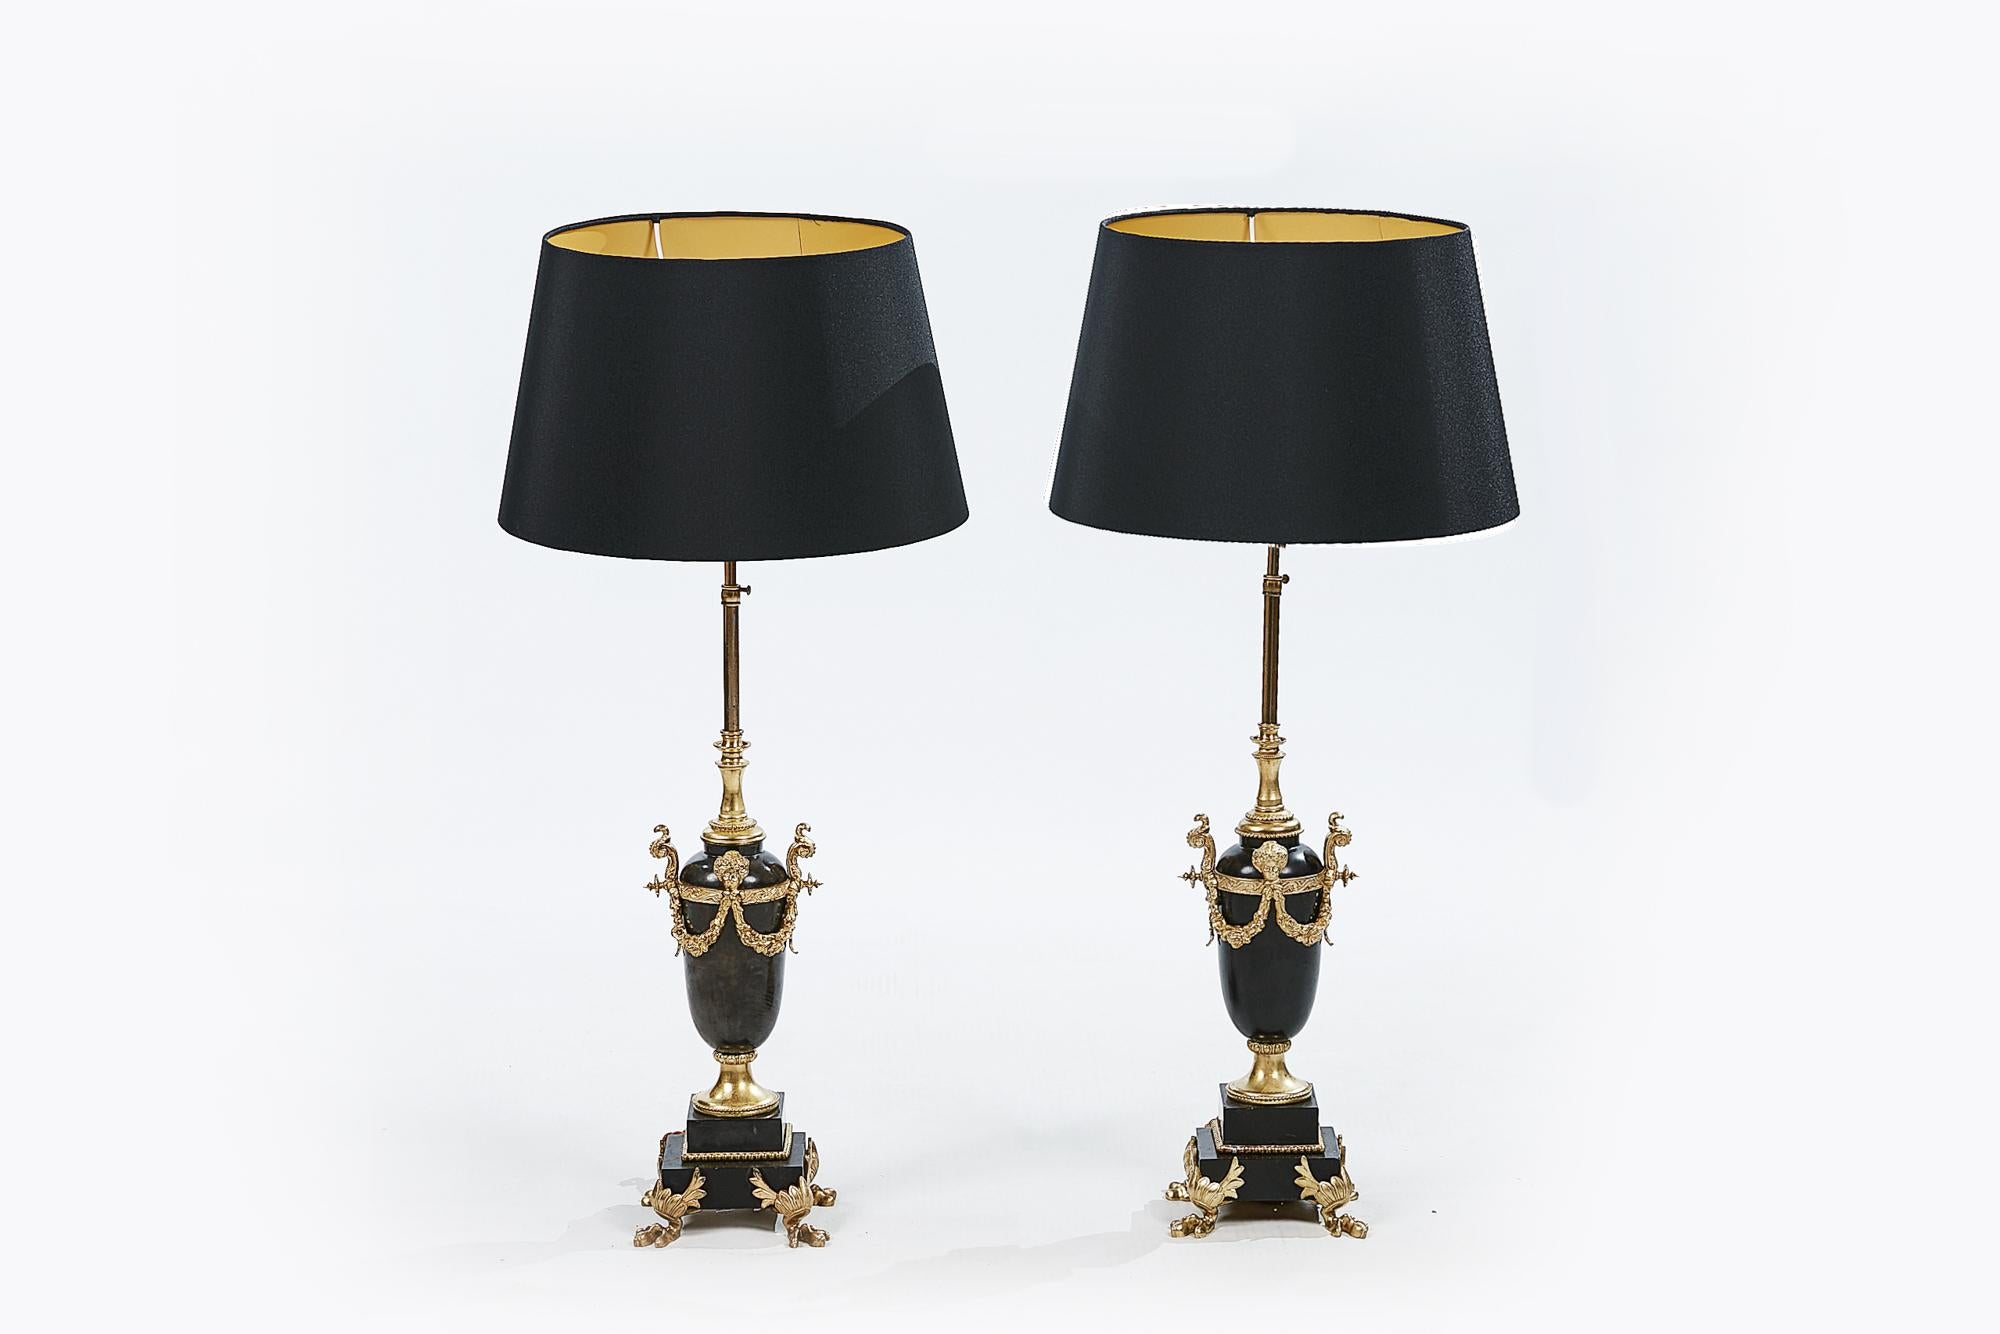 Ormolu Pair of 20th Century Marble and Gilt Lamps in the Neoclassical Style